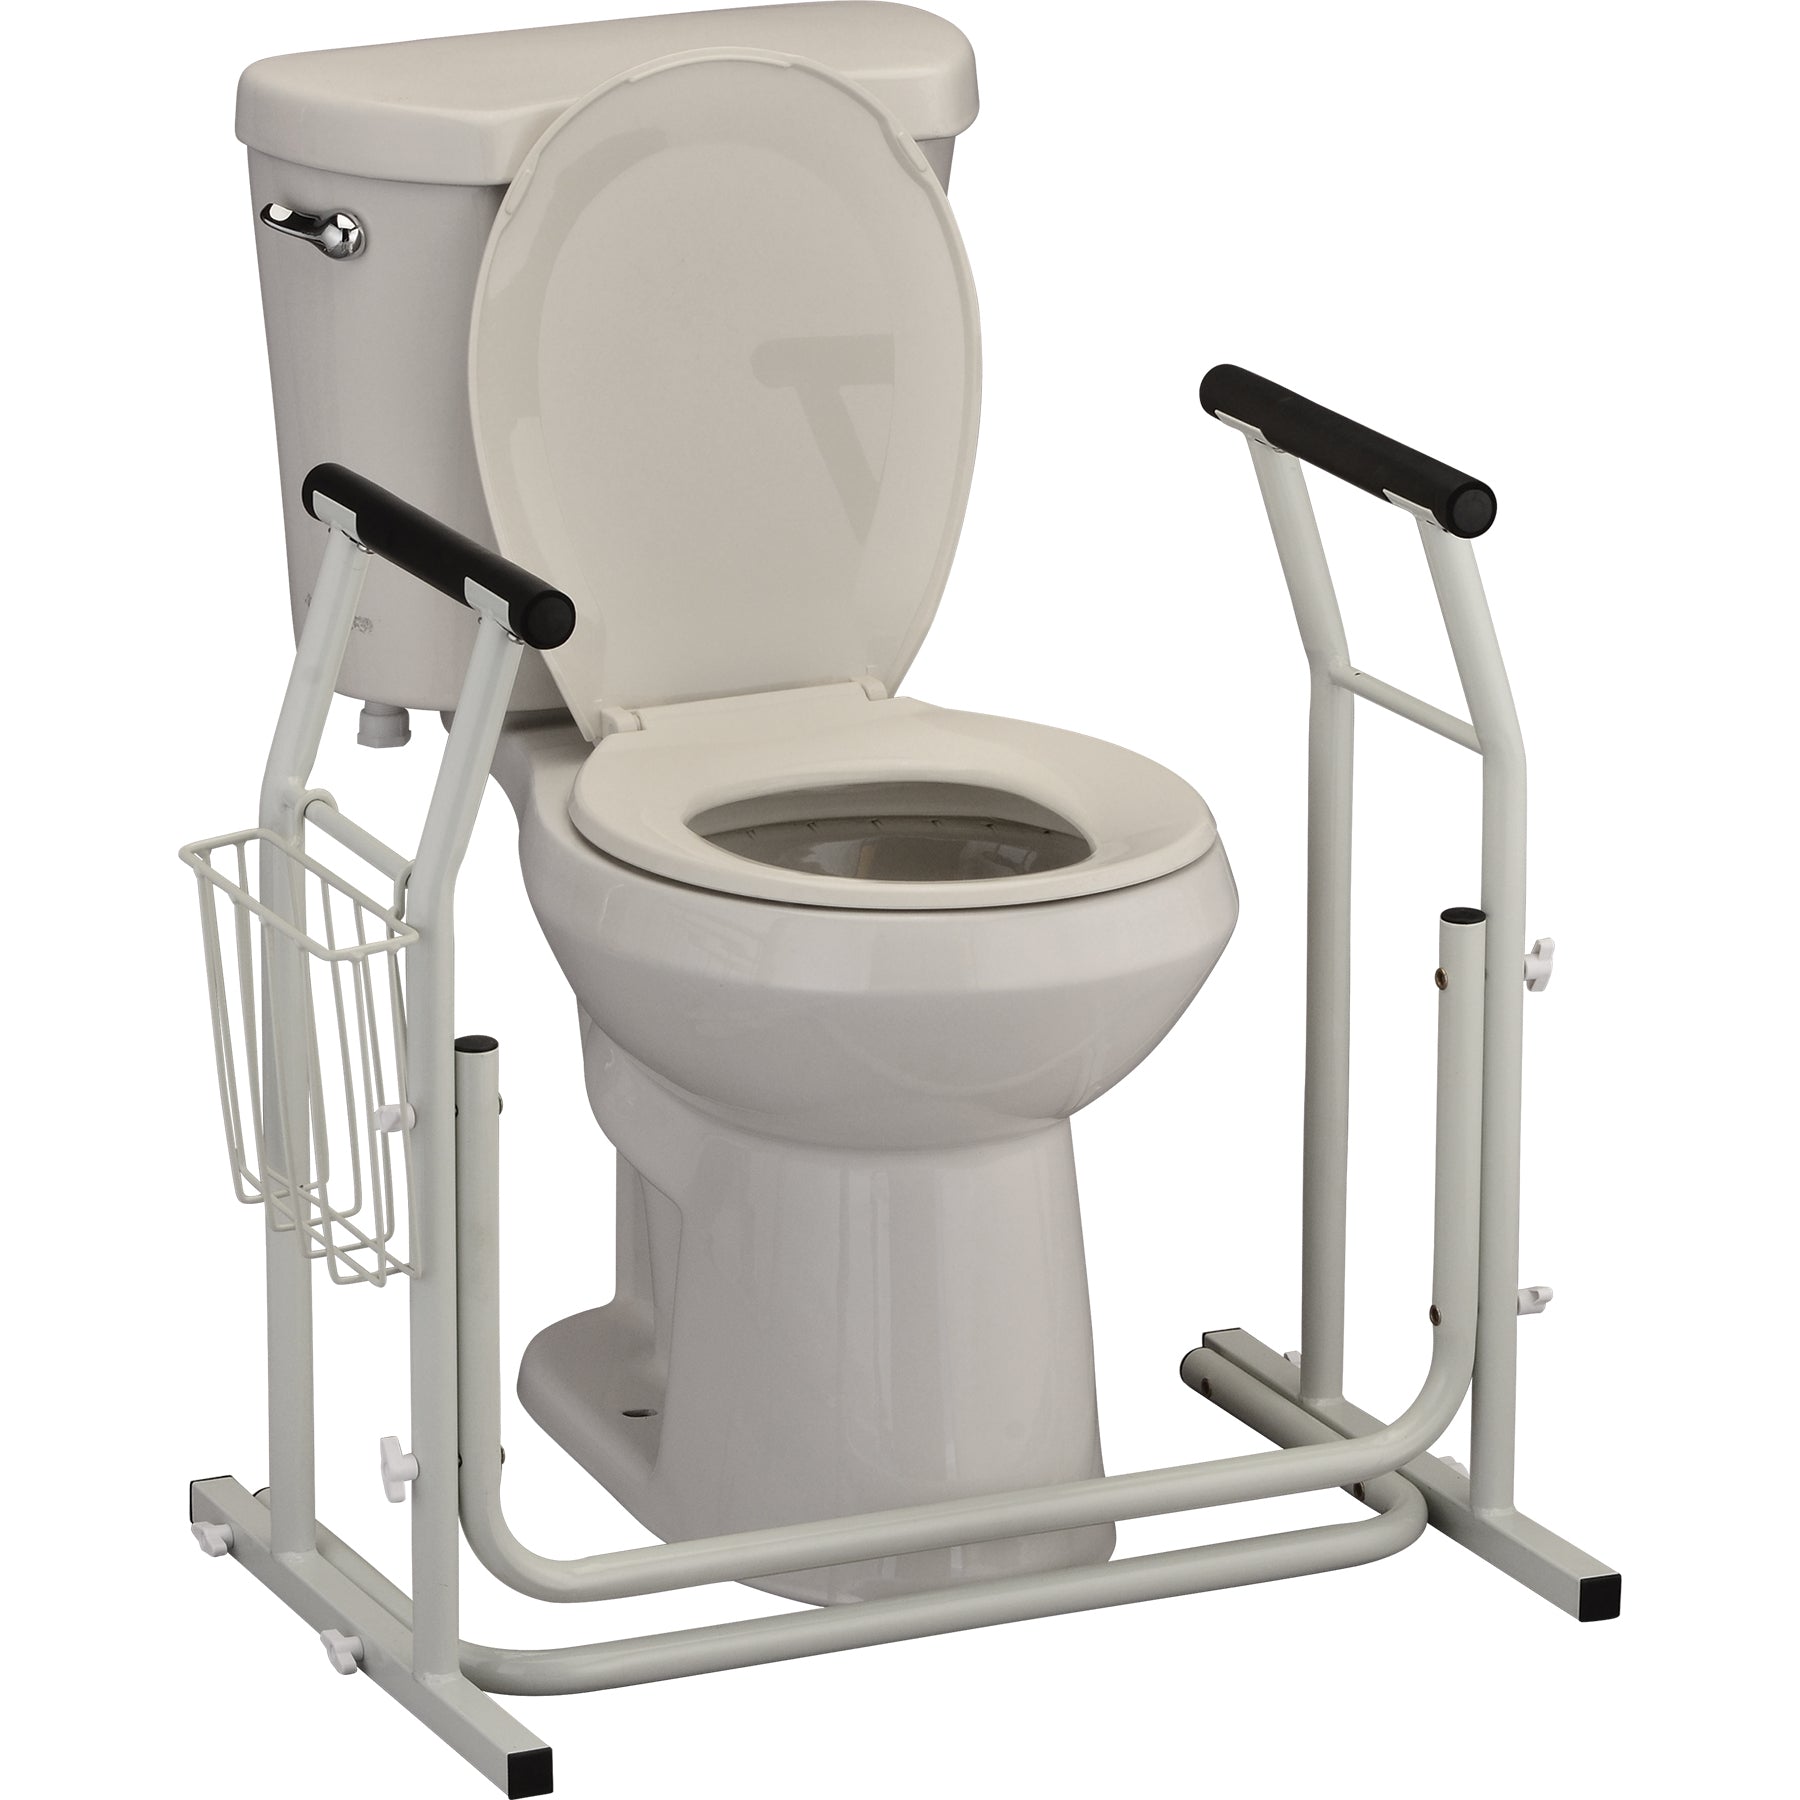 Toilet Safety Support Frame